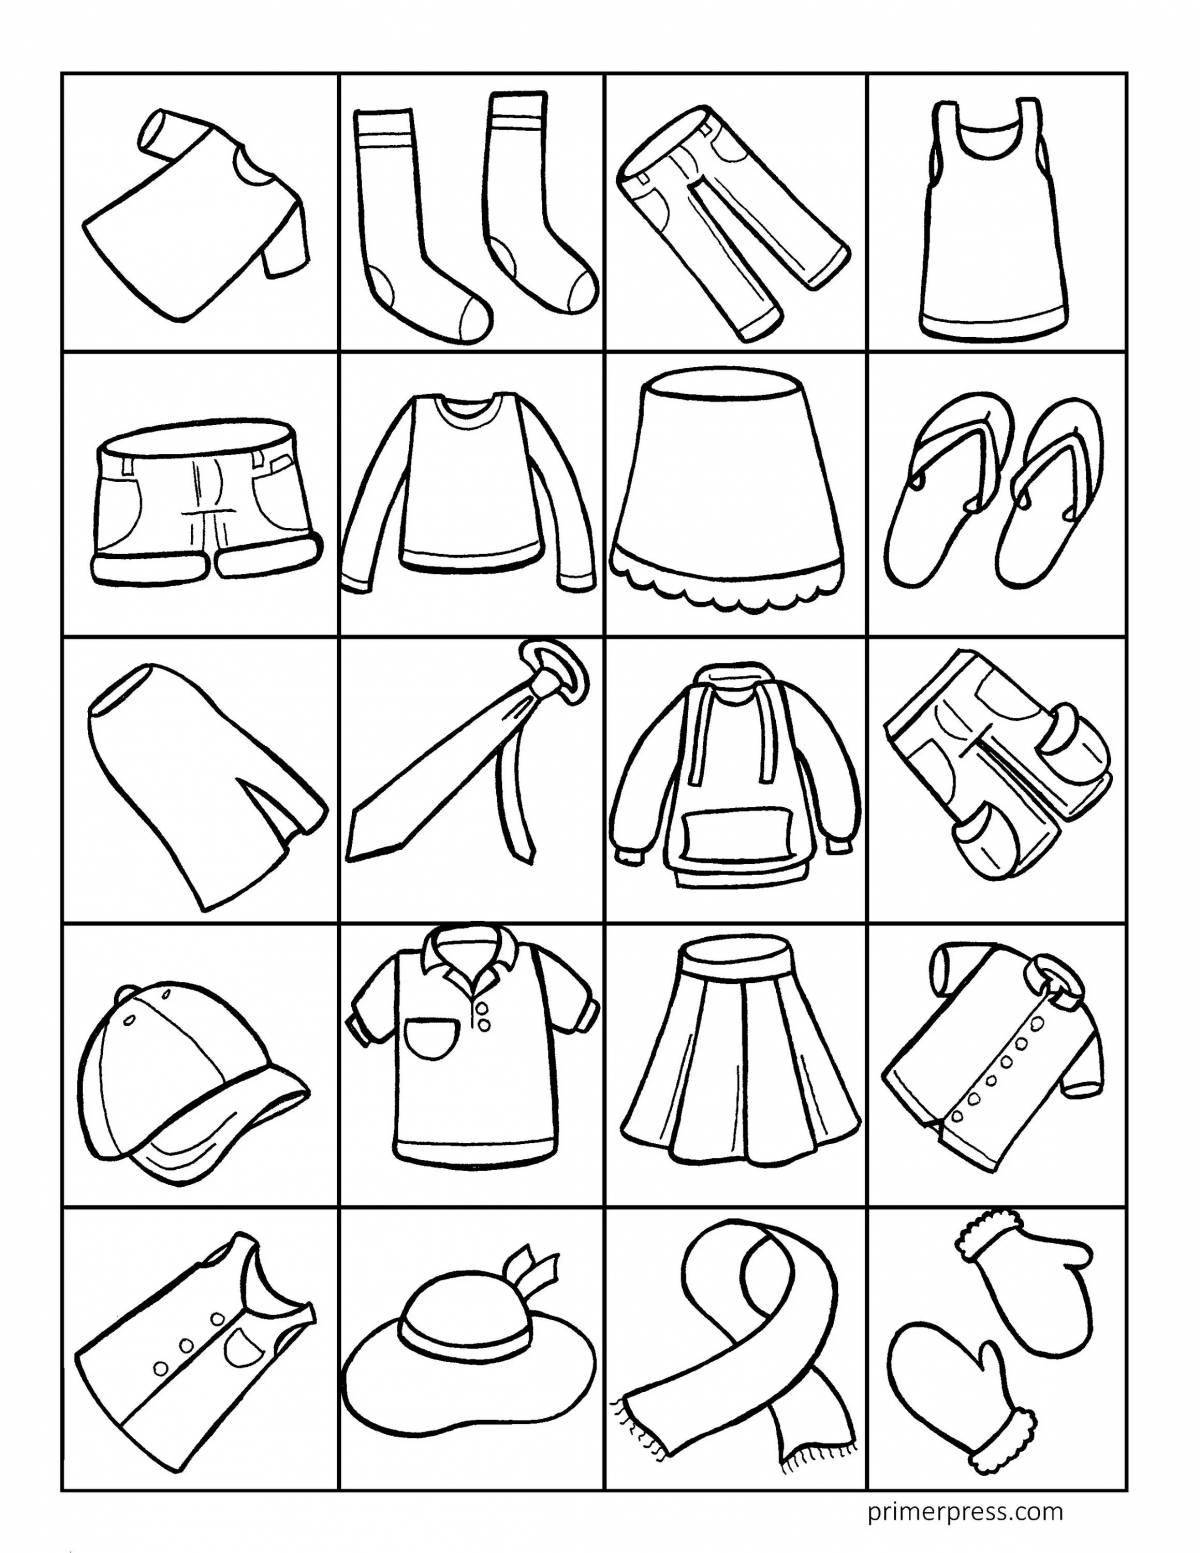 A fun coloring page for seasonal clothes with a task